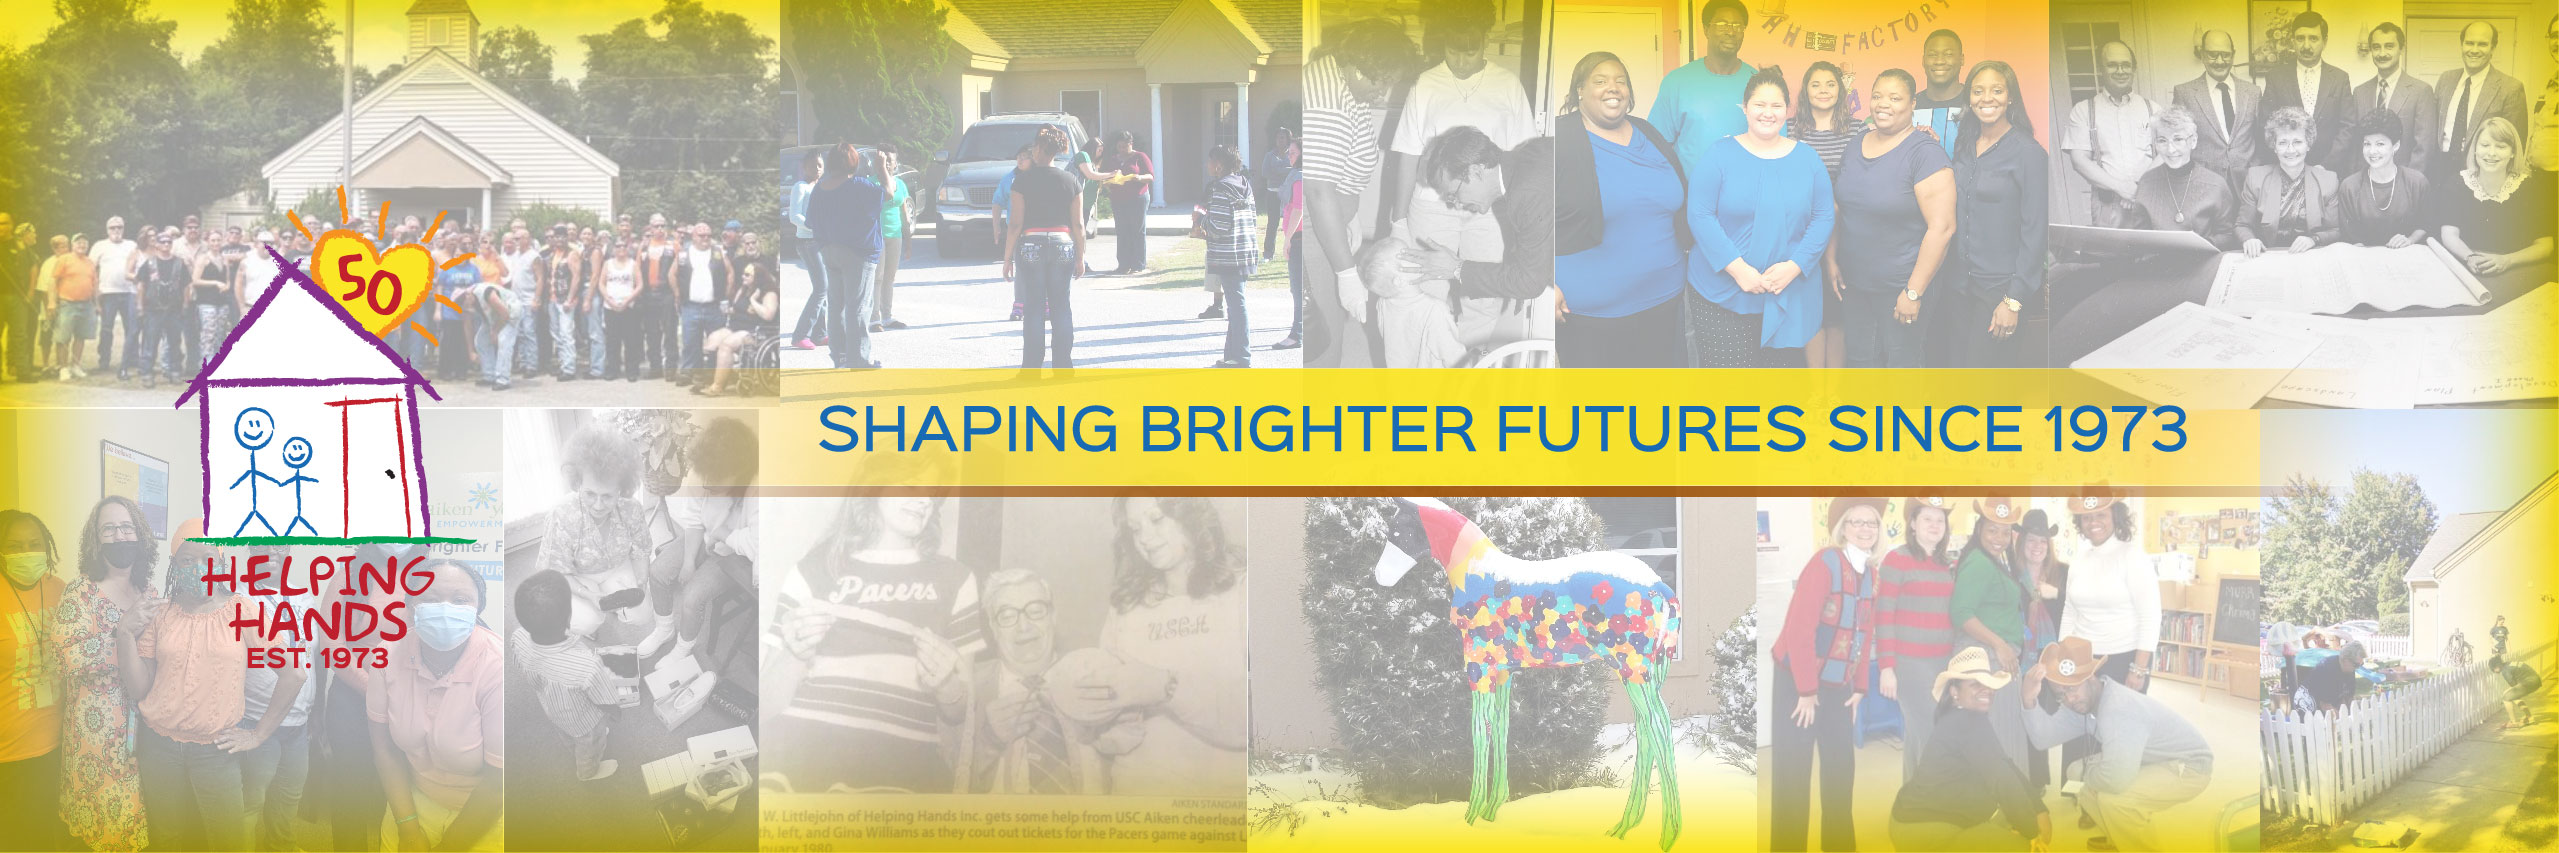 Helping Hands 50th Anniversary, Shaping Brighter Futures Since 1973